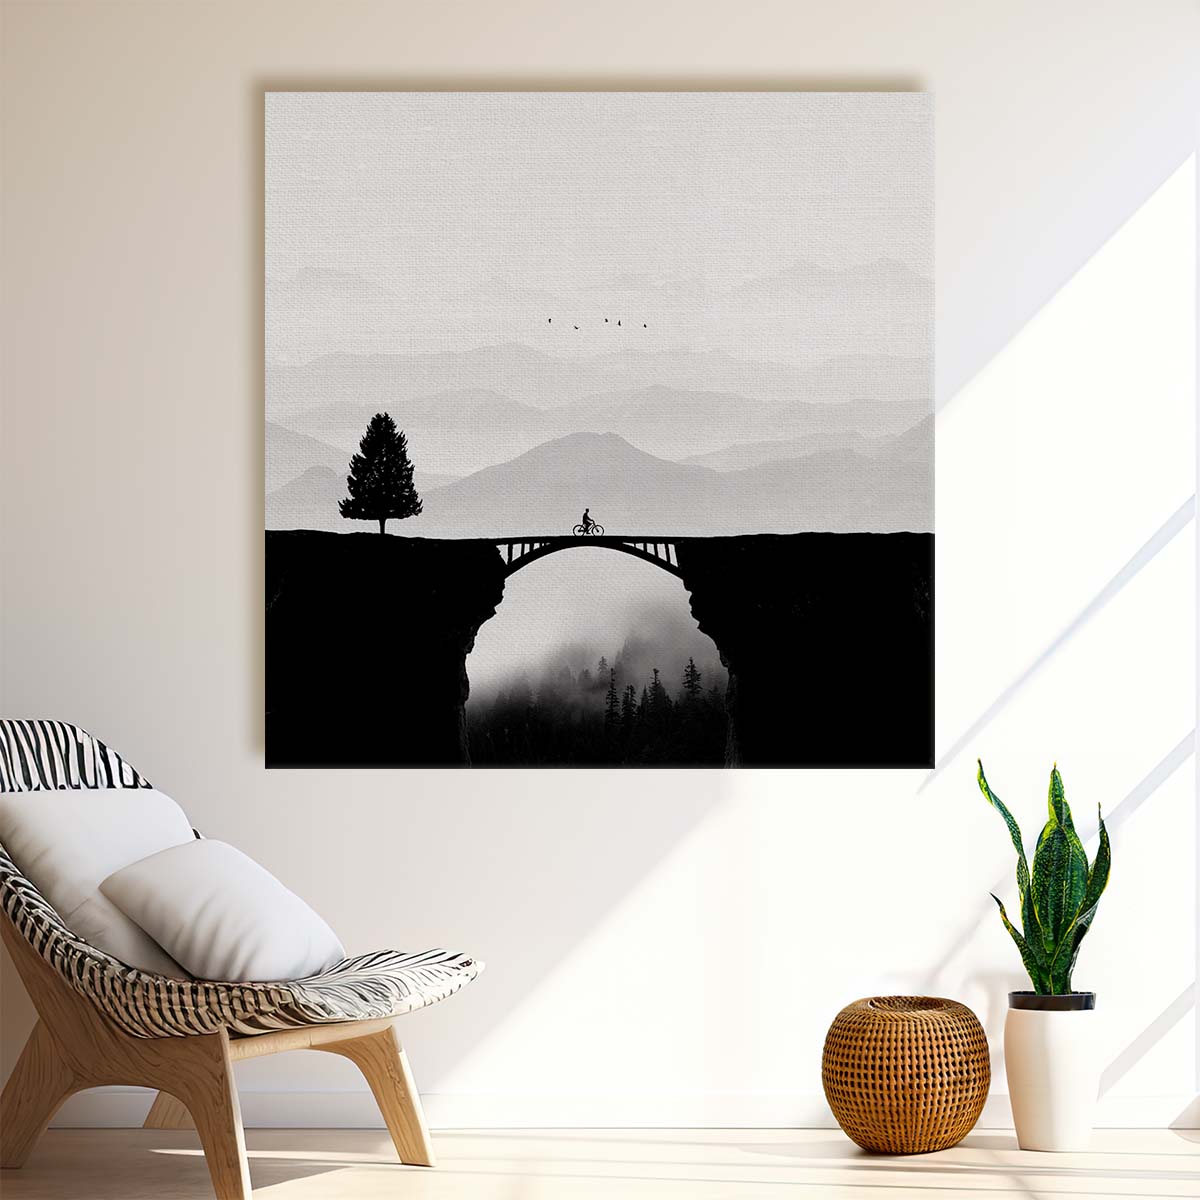 Misty Mountain Bike Adventure in Monochrome Landscape Photography Wall Art by Luxuriance Designs. Made in USA.